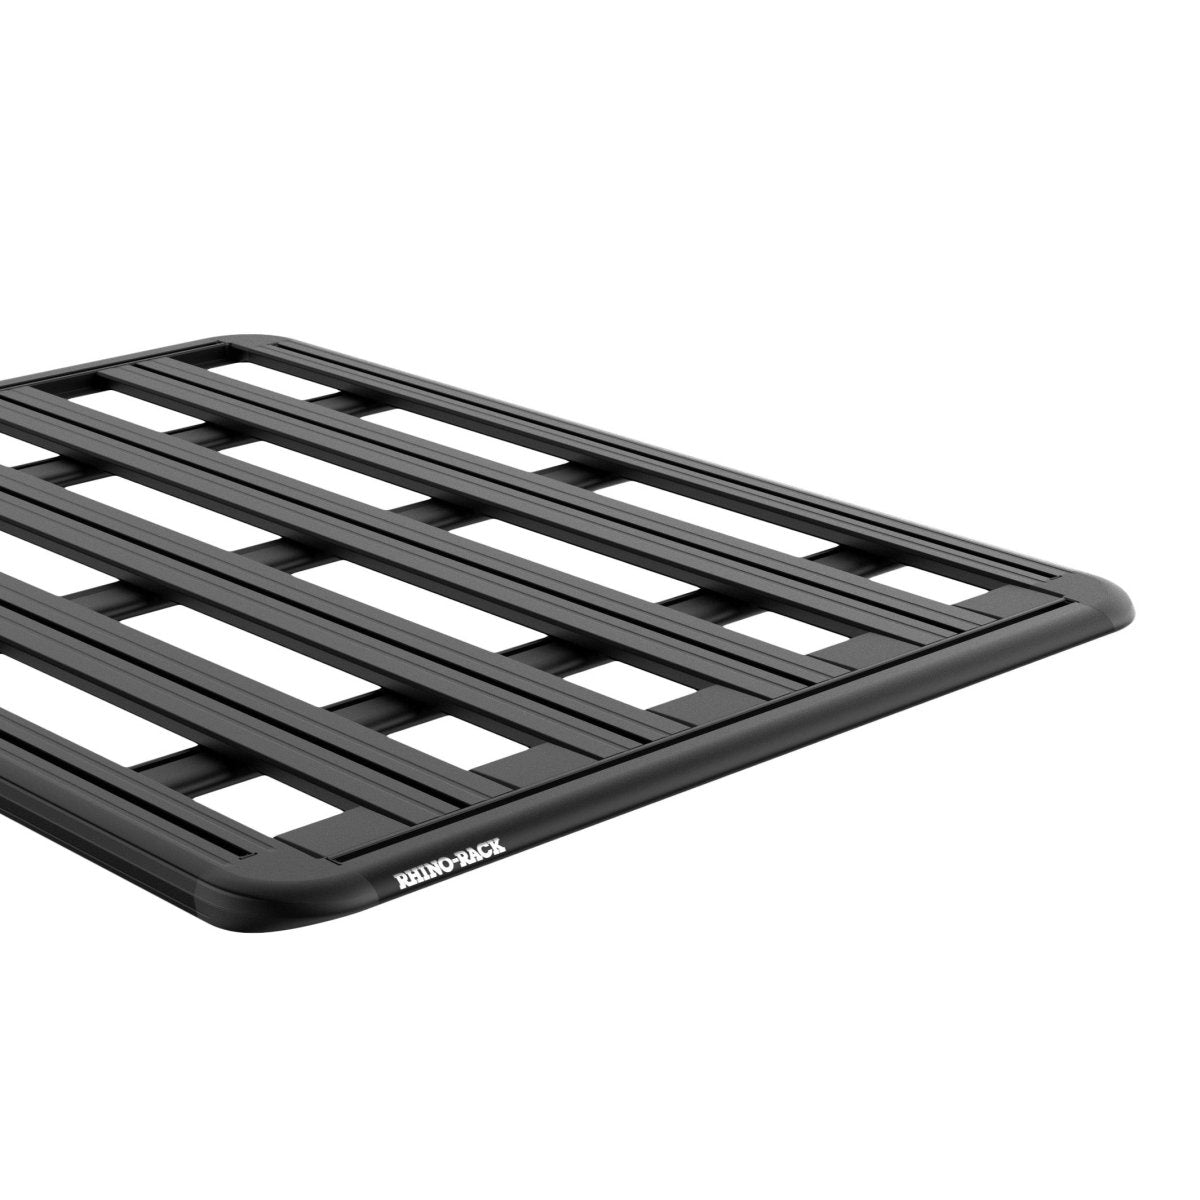 Rhino-Rack - JC-01718 Land Rover Discovery 4 2009-2017 - Pioneer 6 Roof Tray Kit | Stoke Equipment Co Nelson